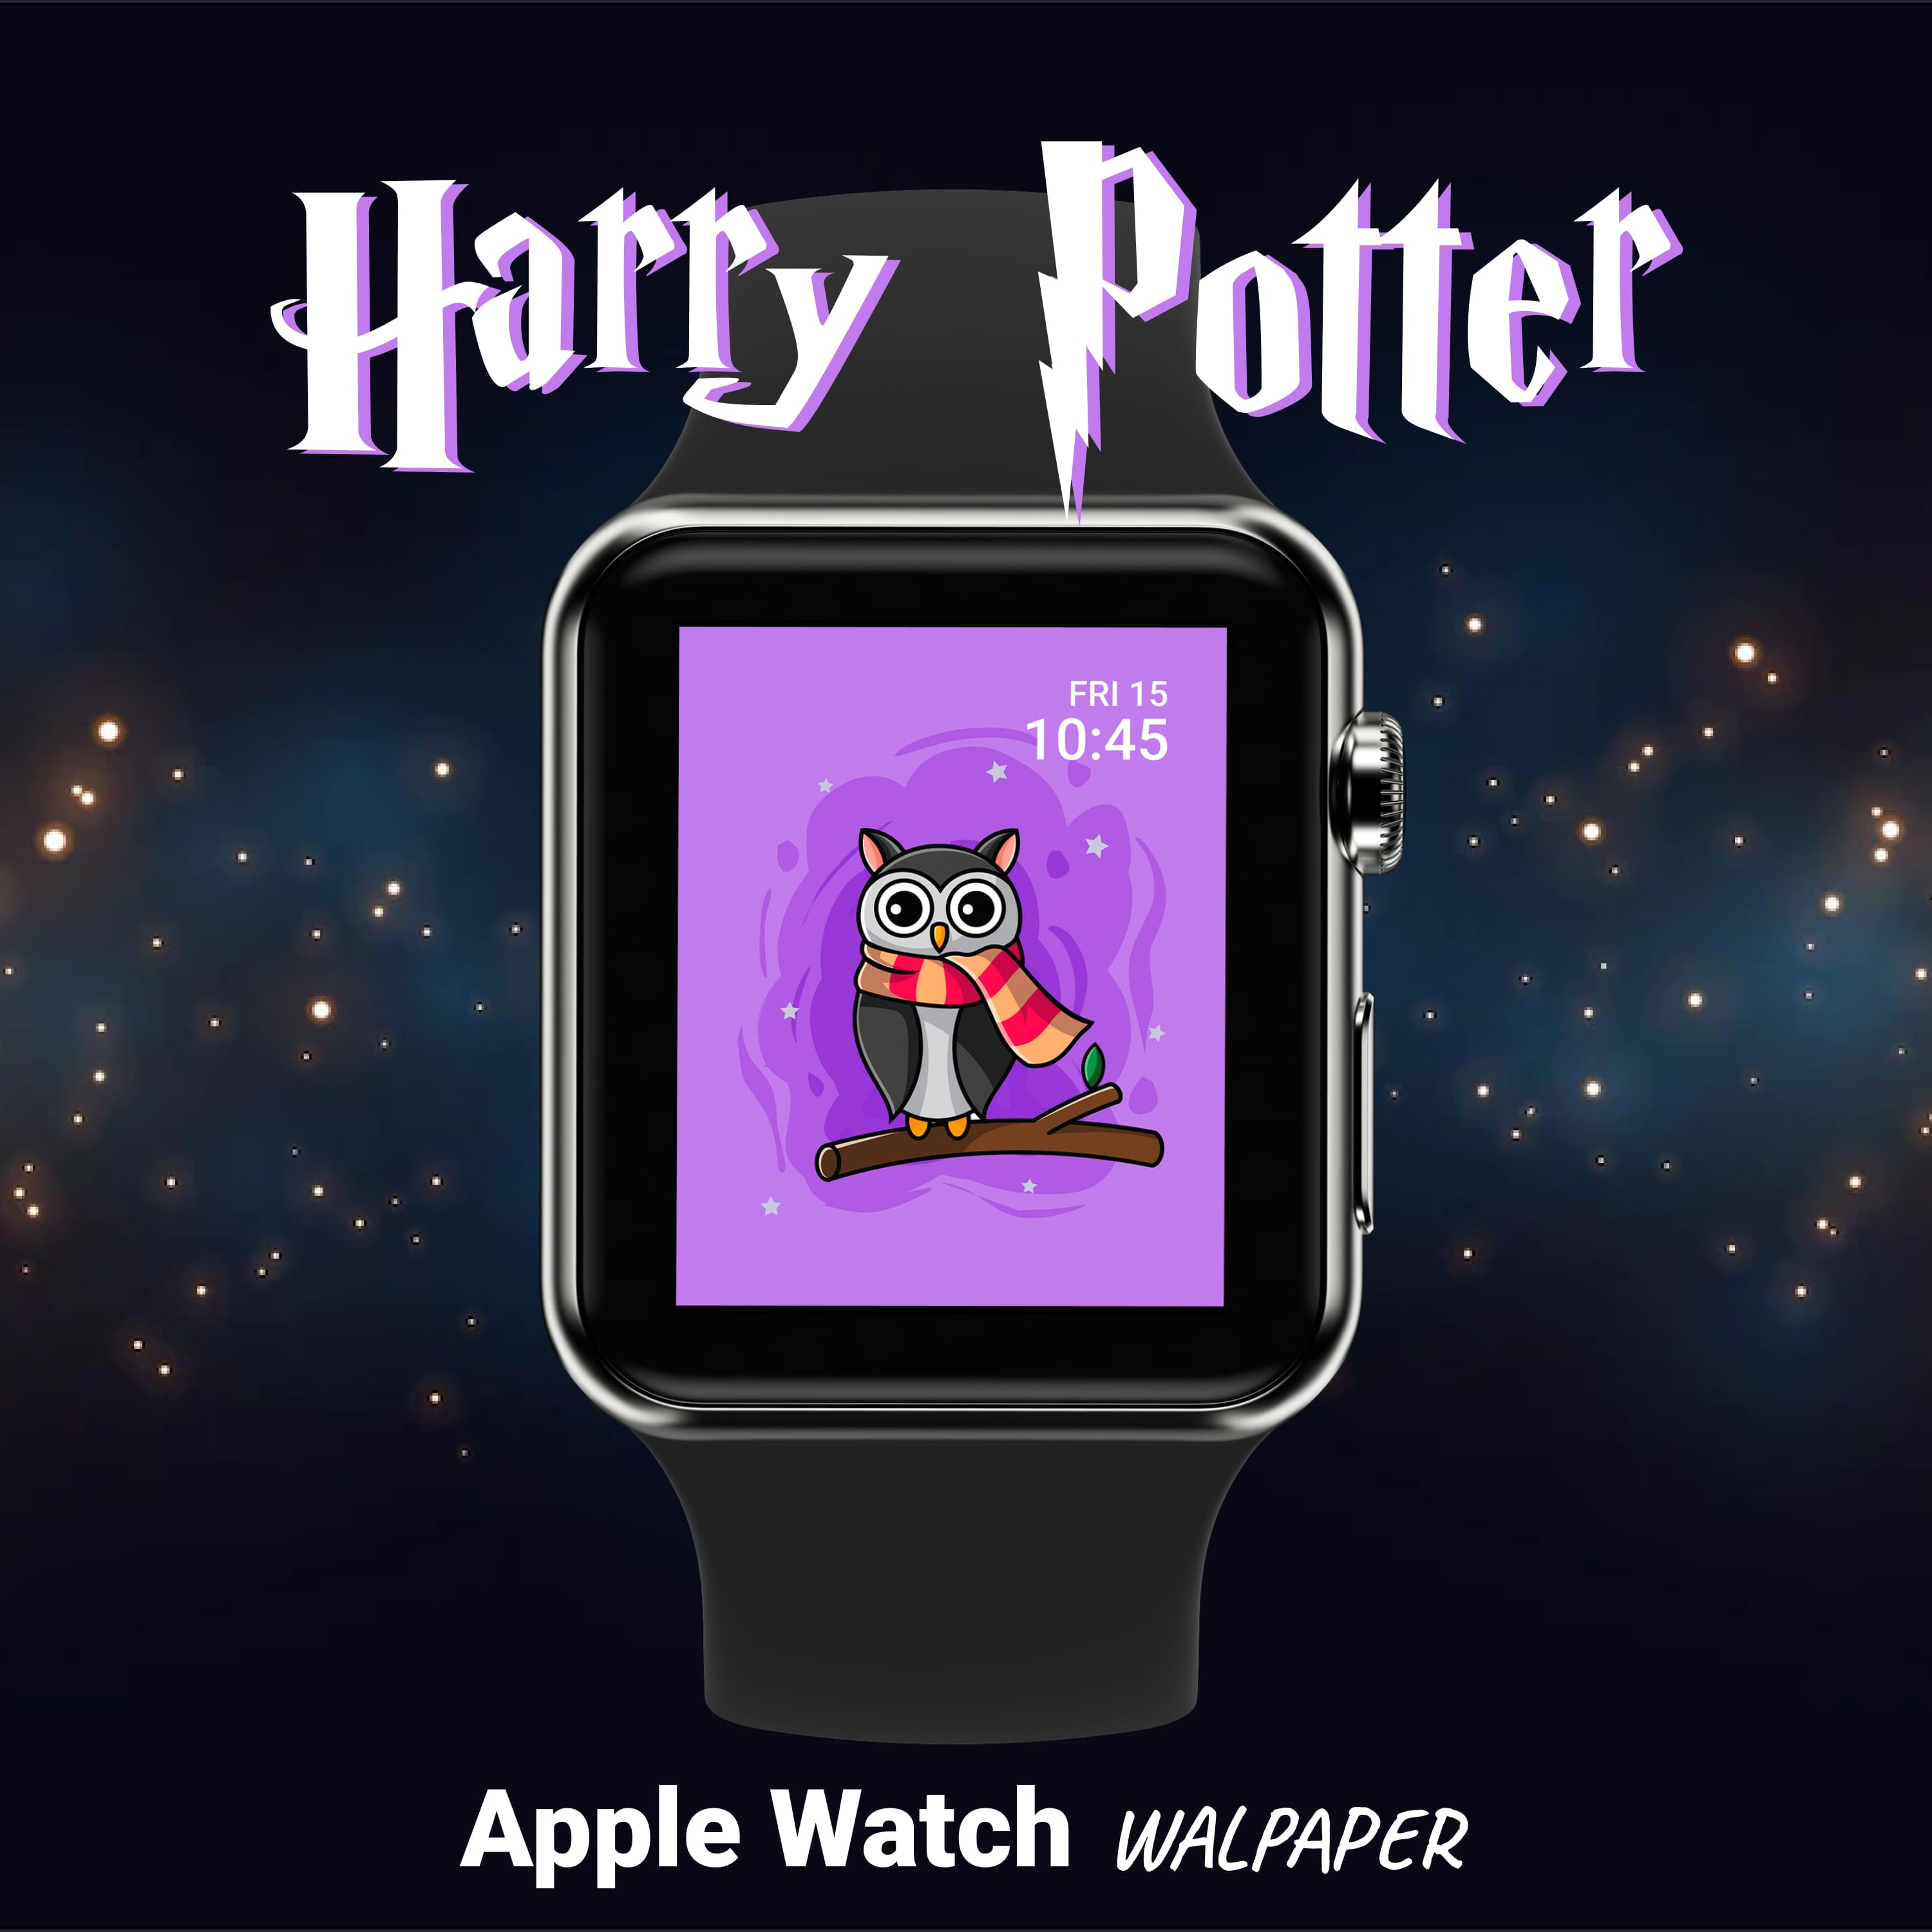 harry potter apple watch faces.